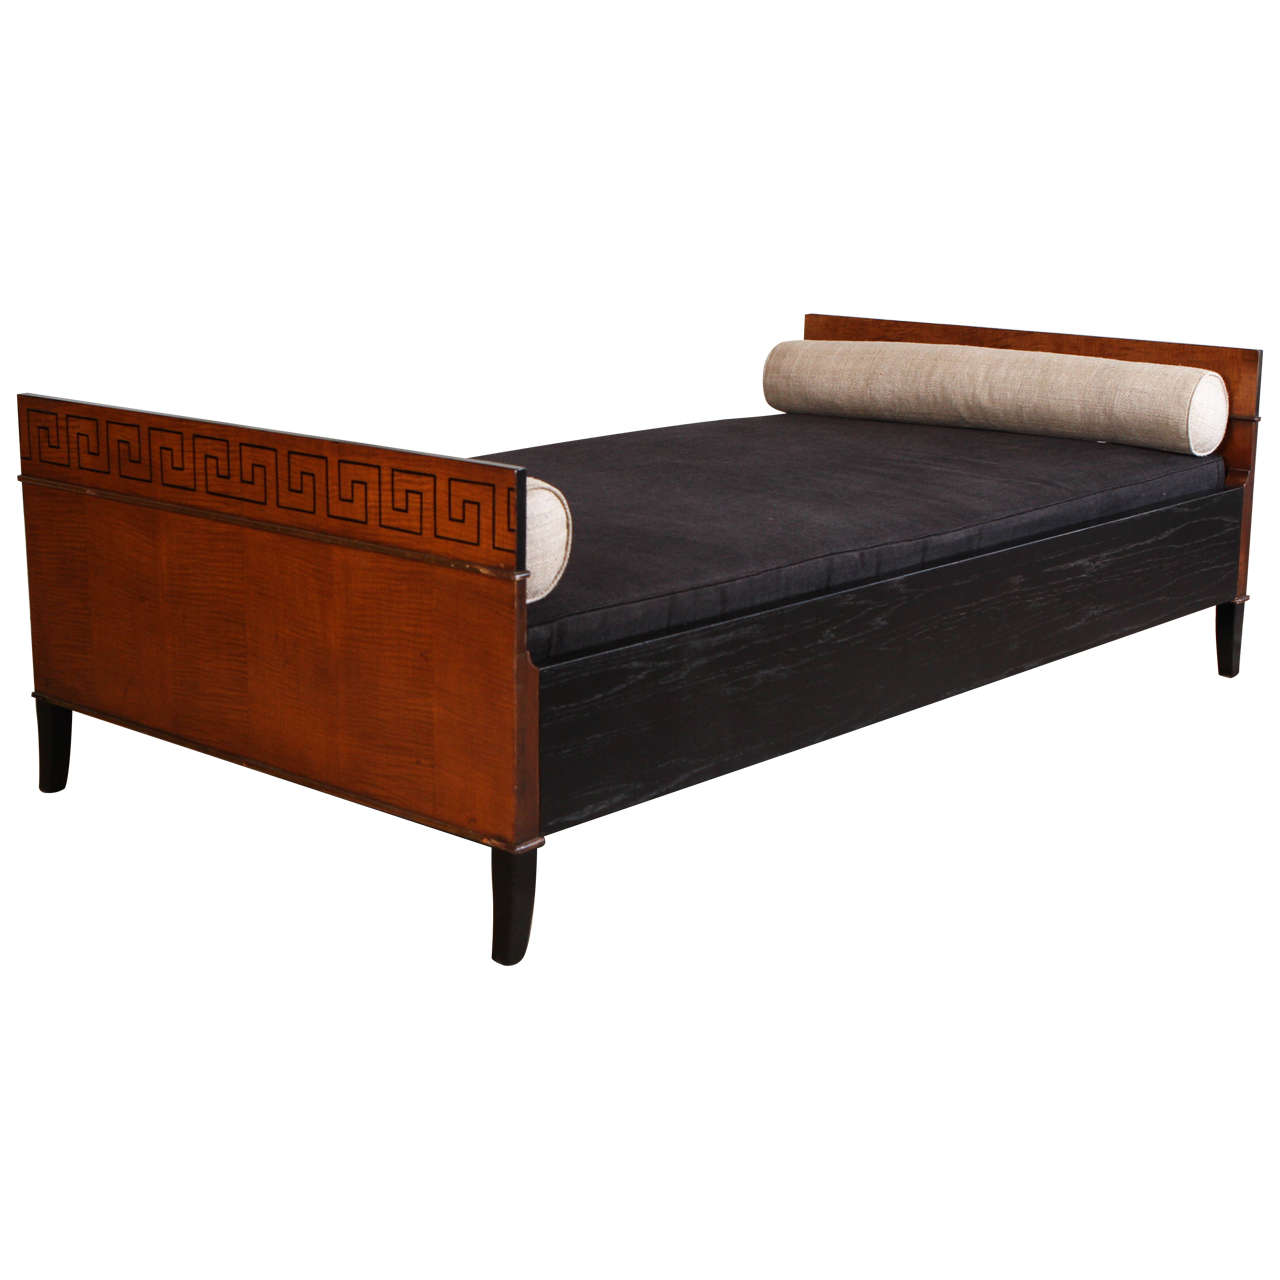 1920s Neoclassical Style Daybed